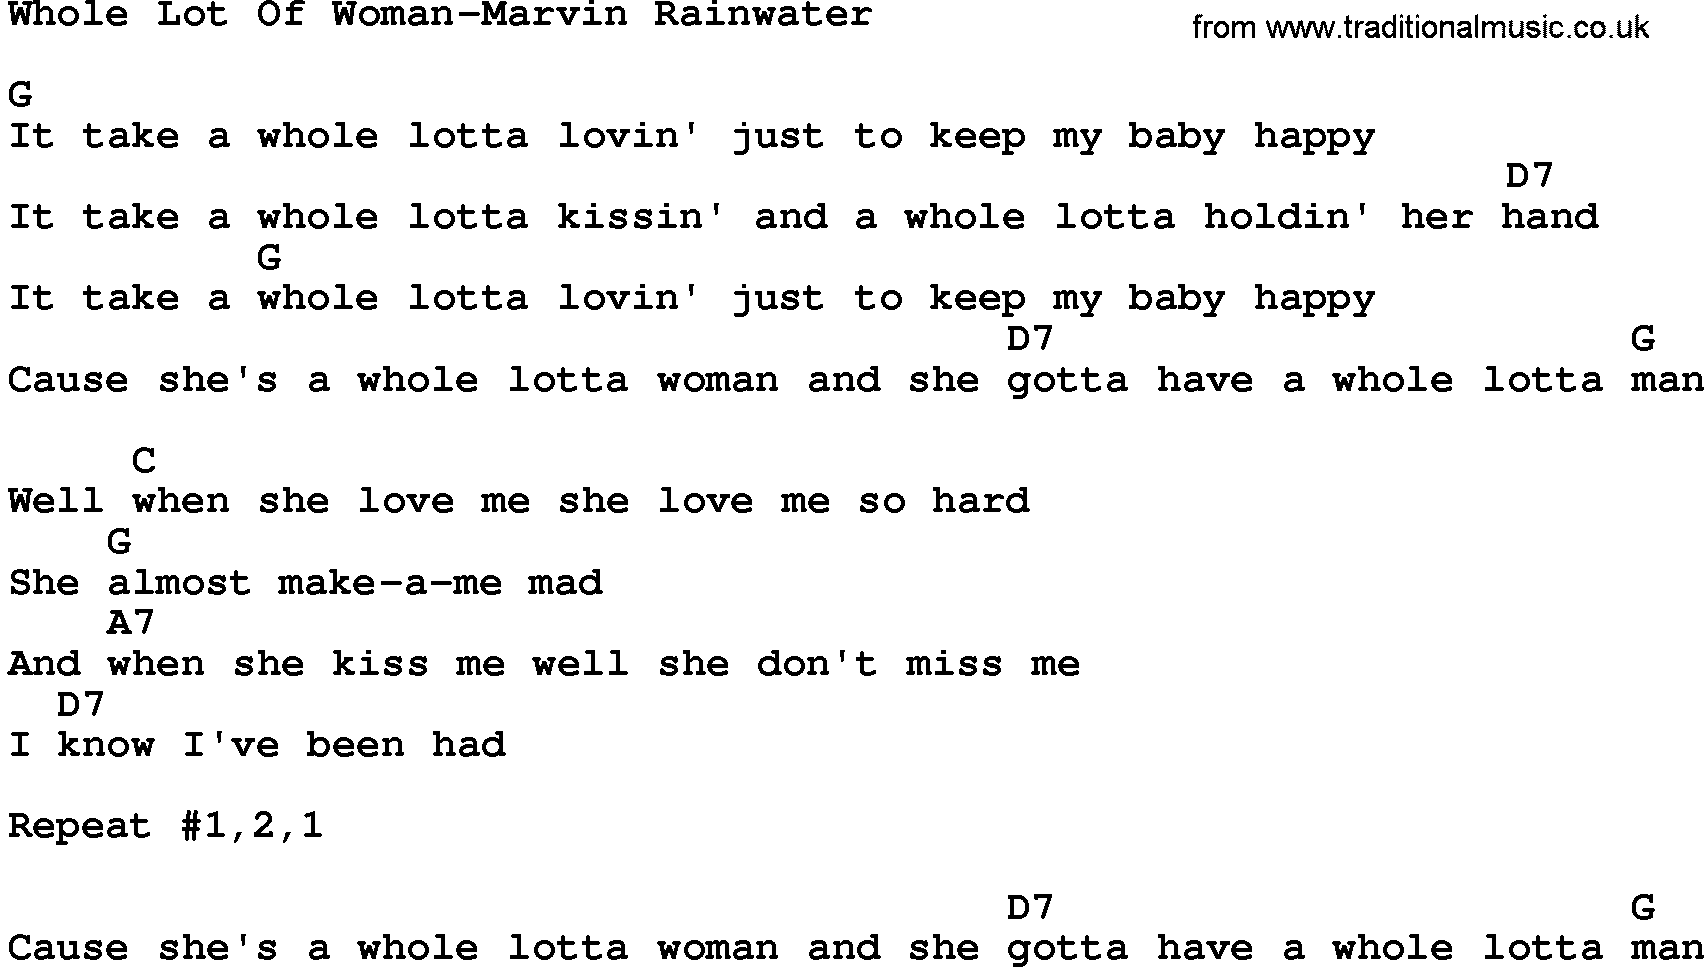 Country music song: Whole Lot Of Woman-Marvin Rainwater lyrics and chords